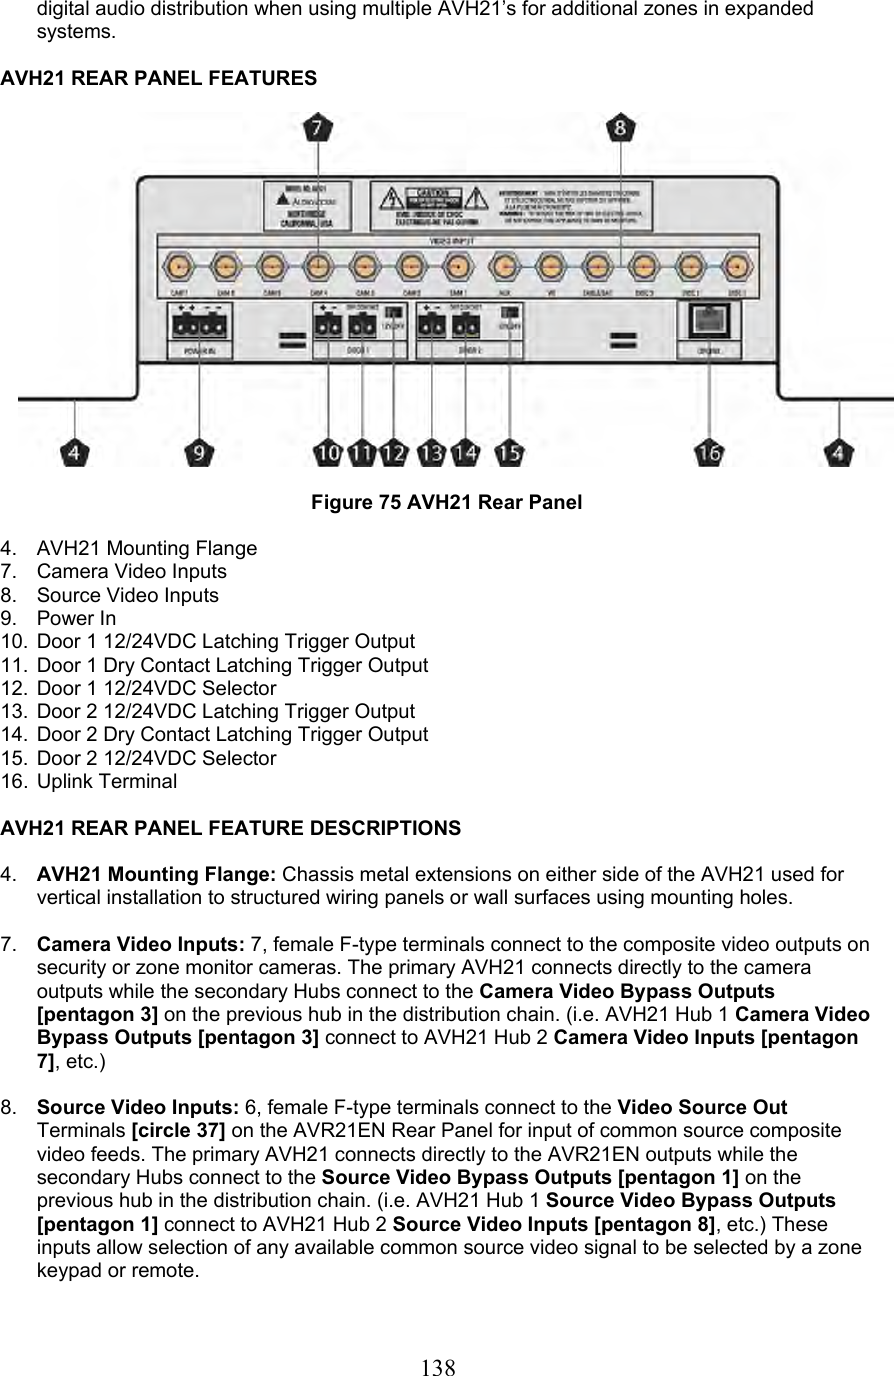  138digital audio distribution when using multiple AVH21’s for additional zones in expanded systems.  AVH21 REAR PANEL FEATURES    Figure 75 AVH21 Rear Panel  4. AVH21 Mounting Flange 7.  Camera Video Inputs 8.  Source Video Inputs 9. Power In 10.  Door 1 12/24VDC Latching Trigger Output 11.  Door 1 Dry Contact Latching Trigger Output 12.  Door 1 12/24VDC Selector 13.  Door 2 12/24VDC Latching Trigger Output 14.  Door 2 Dry Contact Latching Trigger Output 15.  Door 2 12/24VDC Selector 16. Uplink Terminal  AVH21 REAR PANEL FEATURE DESCRIPTIONS  4.  AVH21 Mounting Flange: Chassis metal extensions on either side of the AVH21 used for vertical installation to structured wiring panels or wall surfaces using mounting holes.  7.  Camera Video Inputs: 7, female F-type terminals connect to the composite video outputs on security or zone monitor cameras. The primary AVH21 connects directly to the camera outputs while the secondary Hubs connect to the Camera Video Bypass Outputs [pentagon 3] on the previous hub in the distribution chain. (i.e. AVH21 Hub 1 Camera Video Bypass Outputs [pentagon 3] connect to AVH21 Hub 2 Camera Video Inputs [pentagon 7], etc.)  8.  Source Video Inputs: 6, female F-type terminals connect to the Video Source Out Terminals [circle 37] on the AVR21EN Rear Panel for input of common source composite video feeds. The primary AVH21 connects directly to the AVR21EN outputs while the secondary Hubs connect to the Source Video Bypass Outputs [pentagon 1] on the previous hub in the distribution chain. (i.e. AVH21 Hub 1 Source Video Bypass Outputs [pentagon 1] connect to AVH21 Hub 2 Source Video Inputs [pentagon 8], etc.) These inputs allow selection of any available common source video signal to be selected by a zone keypad or remote.  